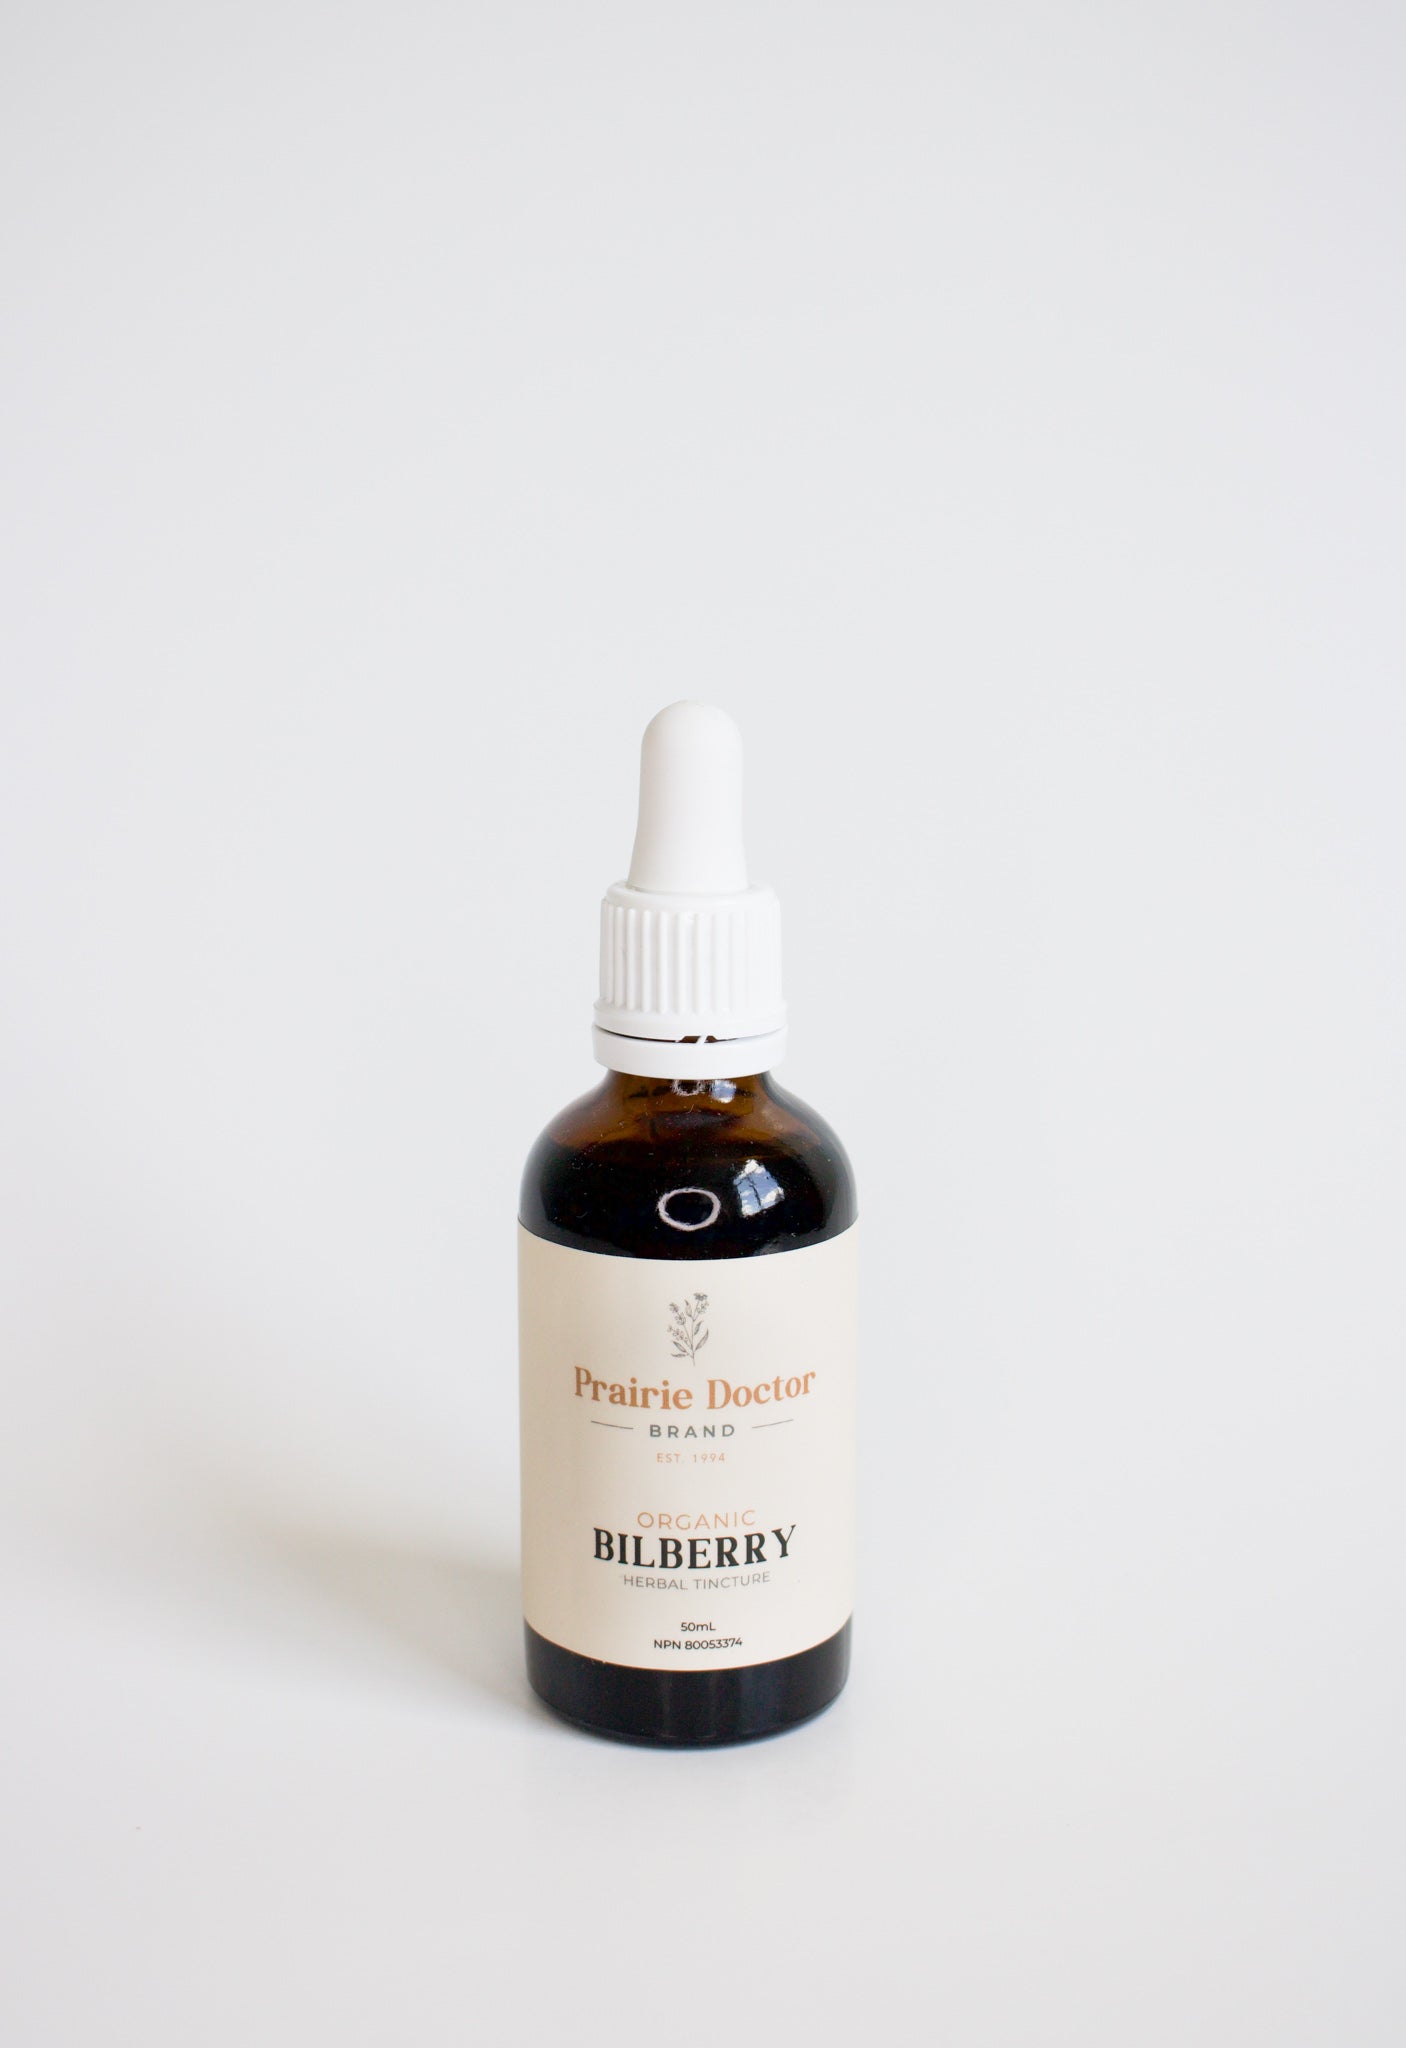 Our organic Bilberry herbal tincture can be used as an astringent and to help relieve digestive issues such as diarrhoea. Billberry also provides antioxidants for the maintenance of good health.